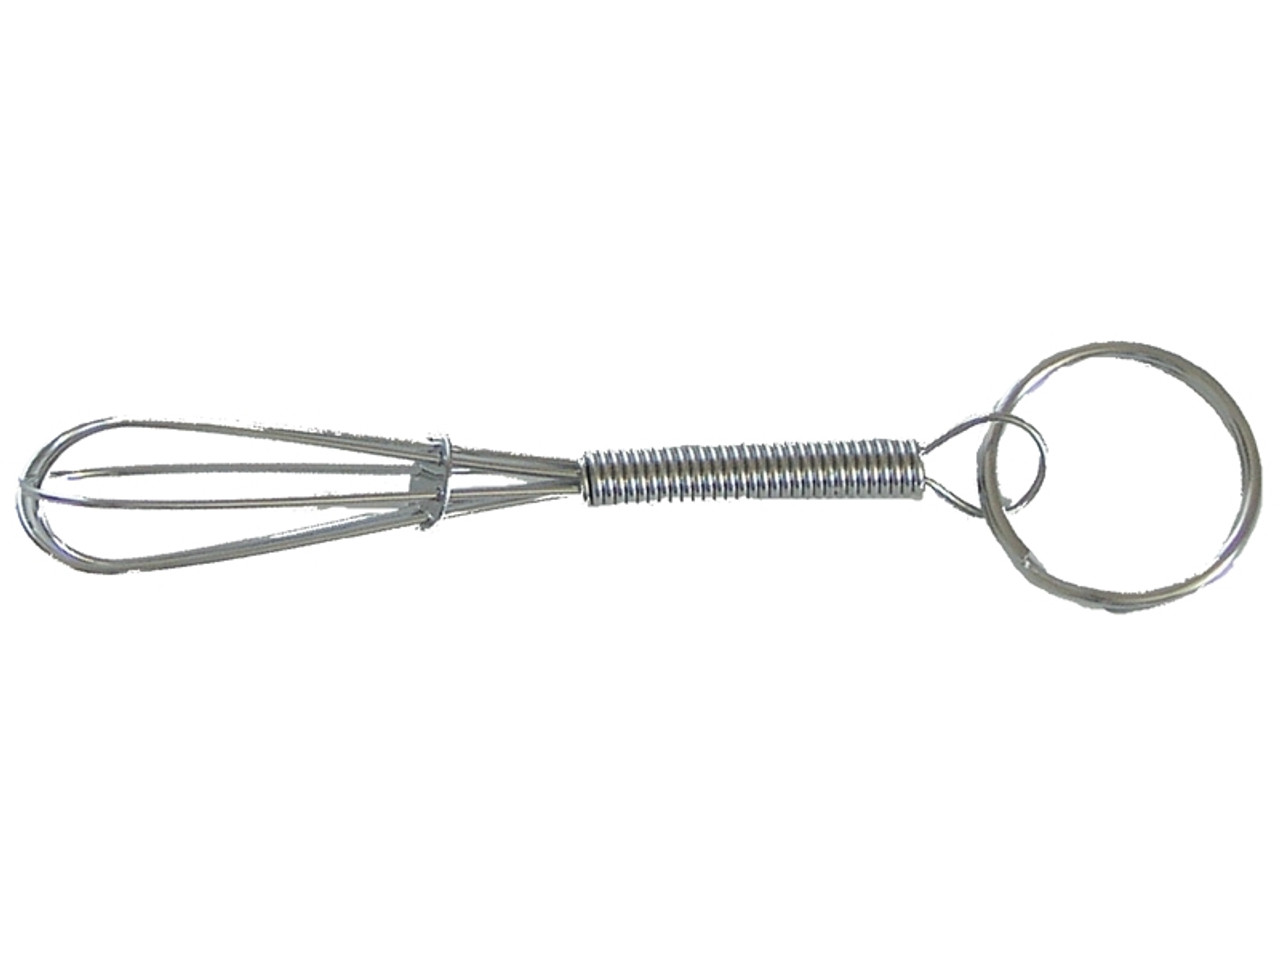 Cybrtrayd Mini Whisk with Keychain, Stainless Steel